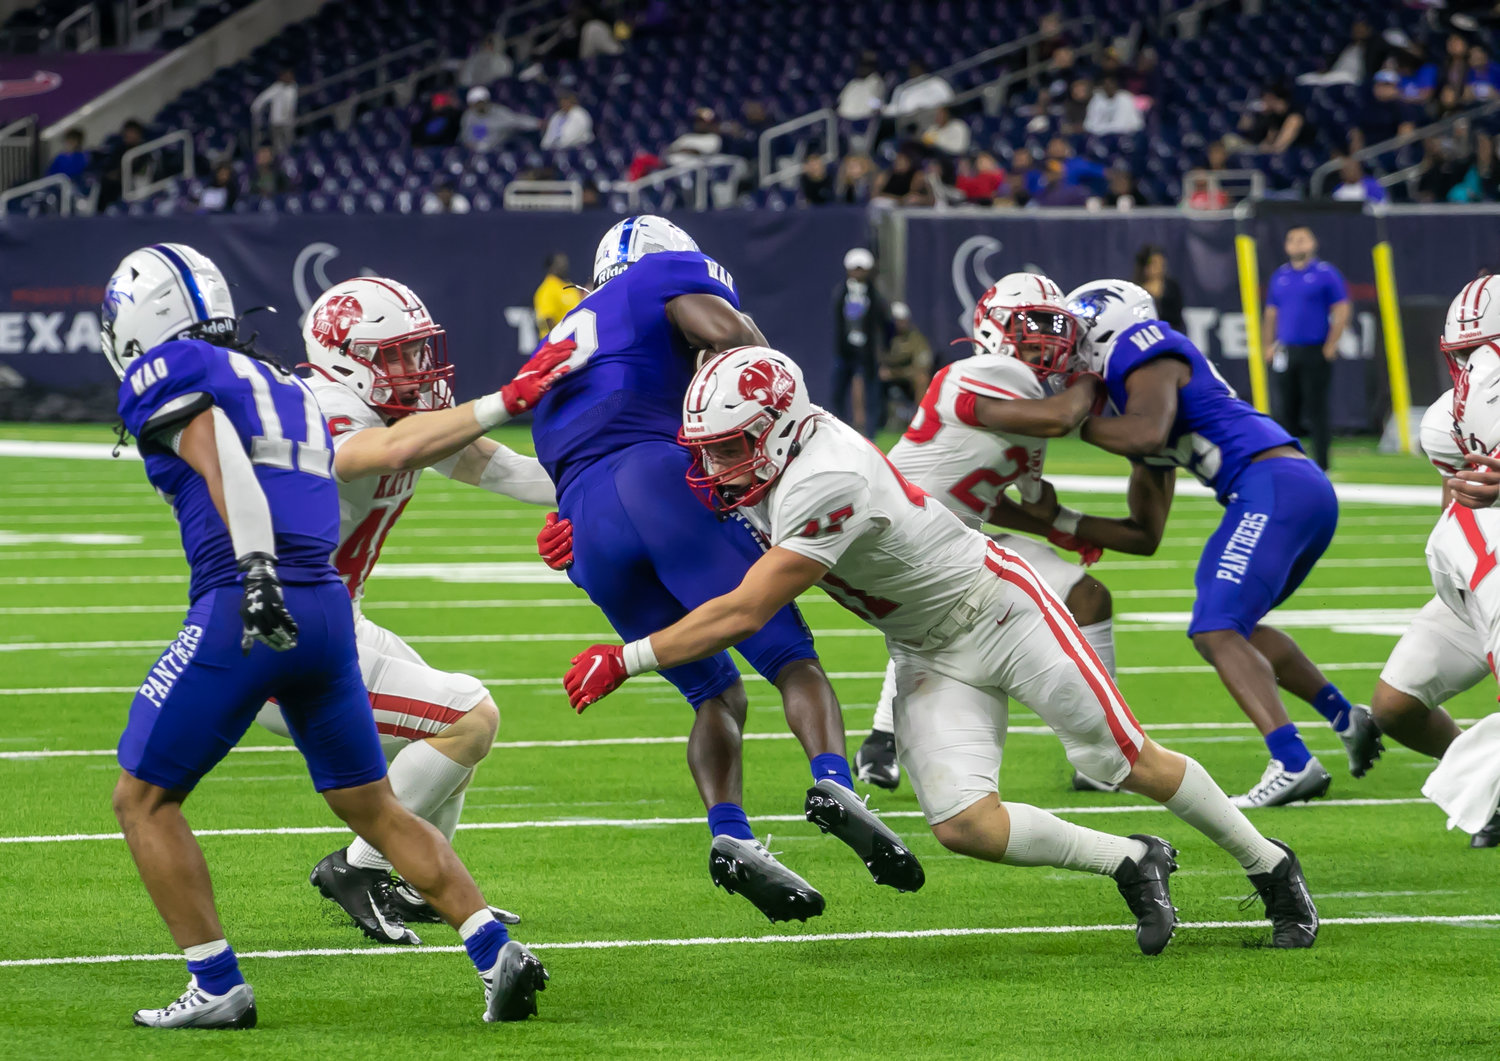 A Katy player wraps up a C.E. King ballcarrier during Friday's Class 6A-Divison II Region III Final between Katy and C.E. King at NRG Stadium.